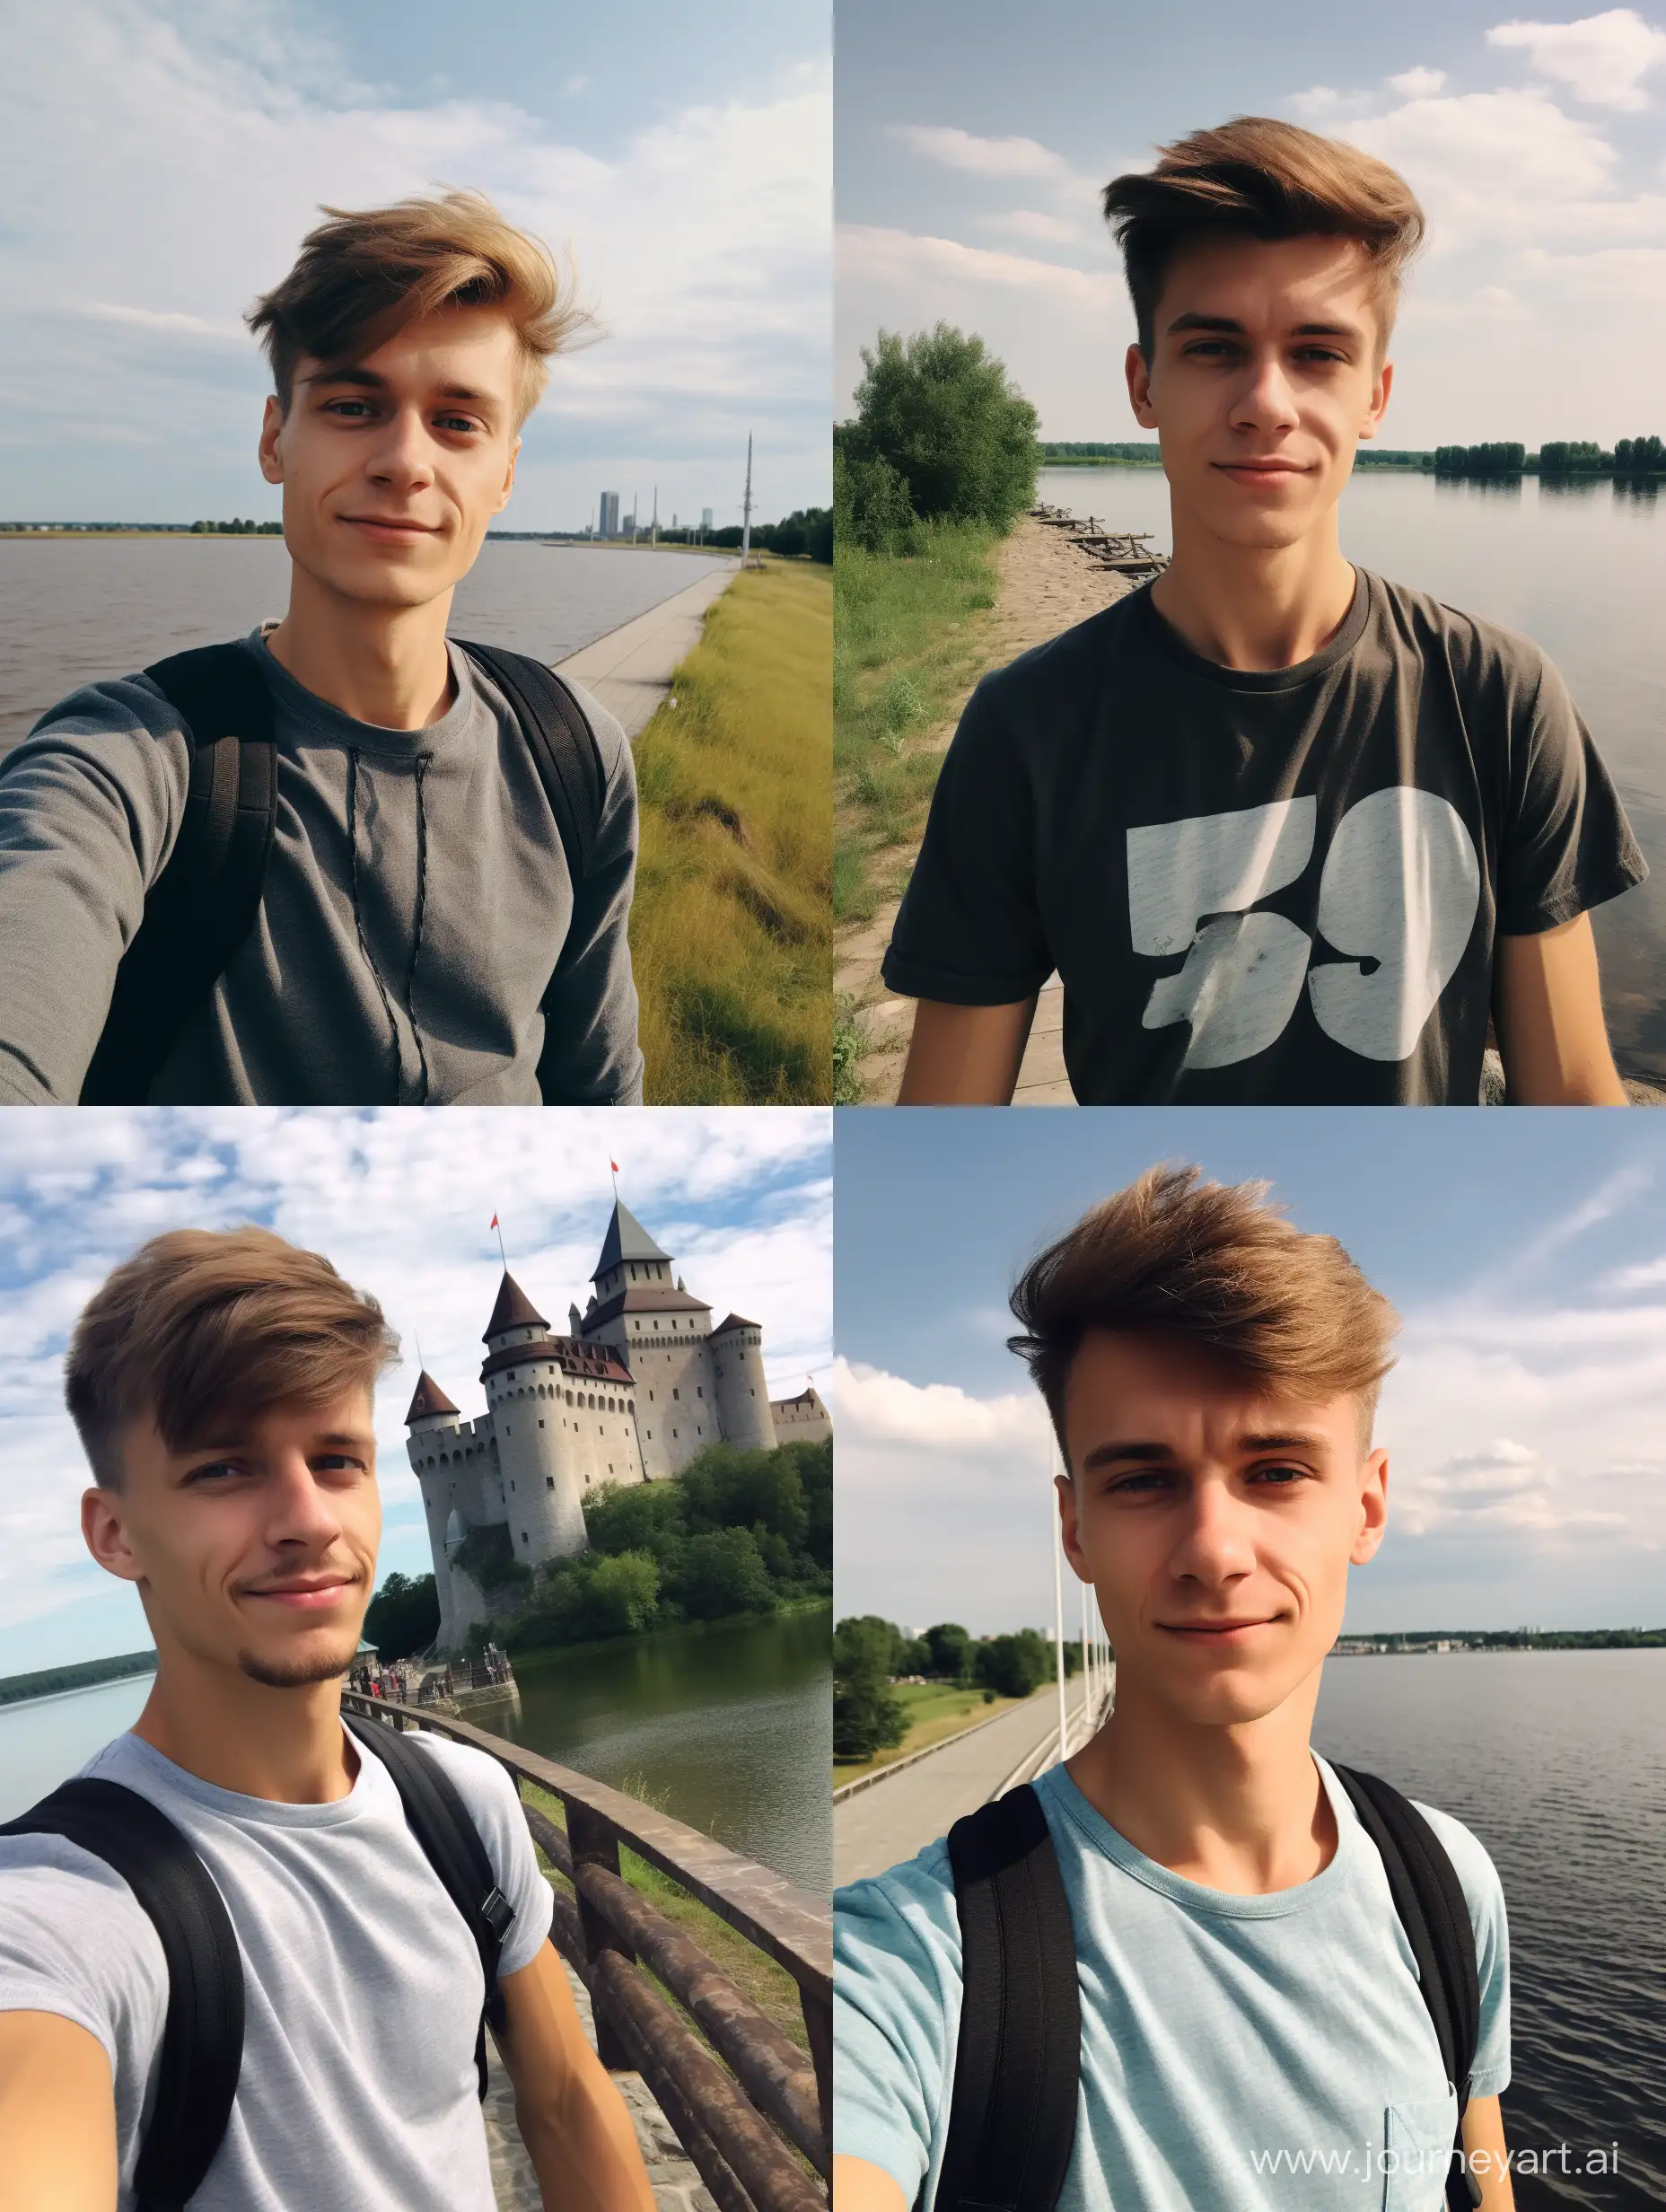 Selfie of 30 years old man, standing in front of Vistula river in Poland, taken for Snapchat in 2018